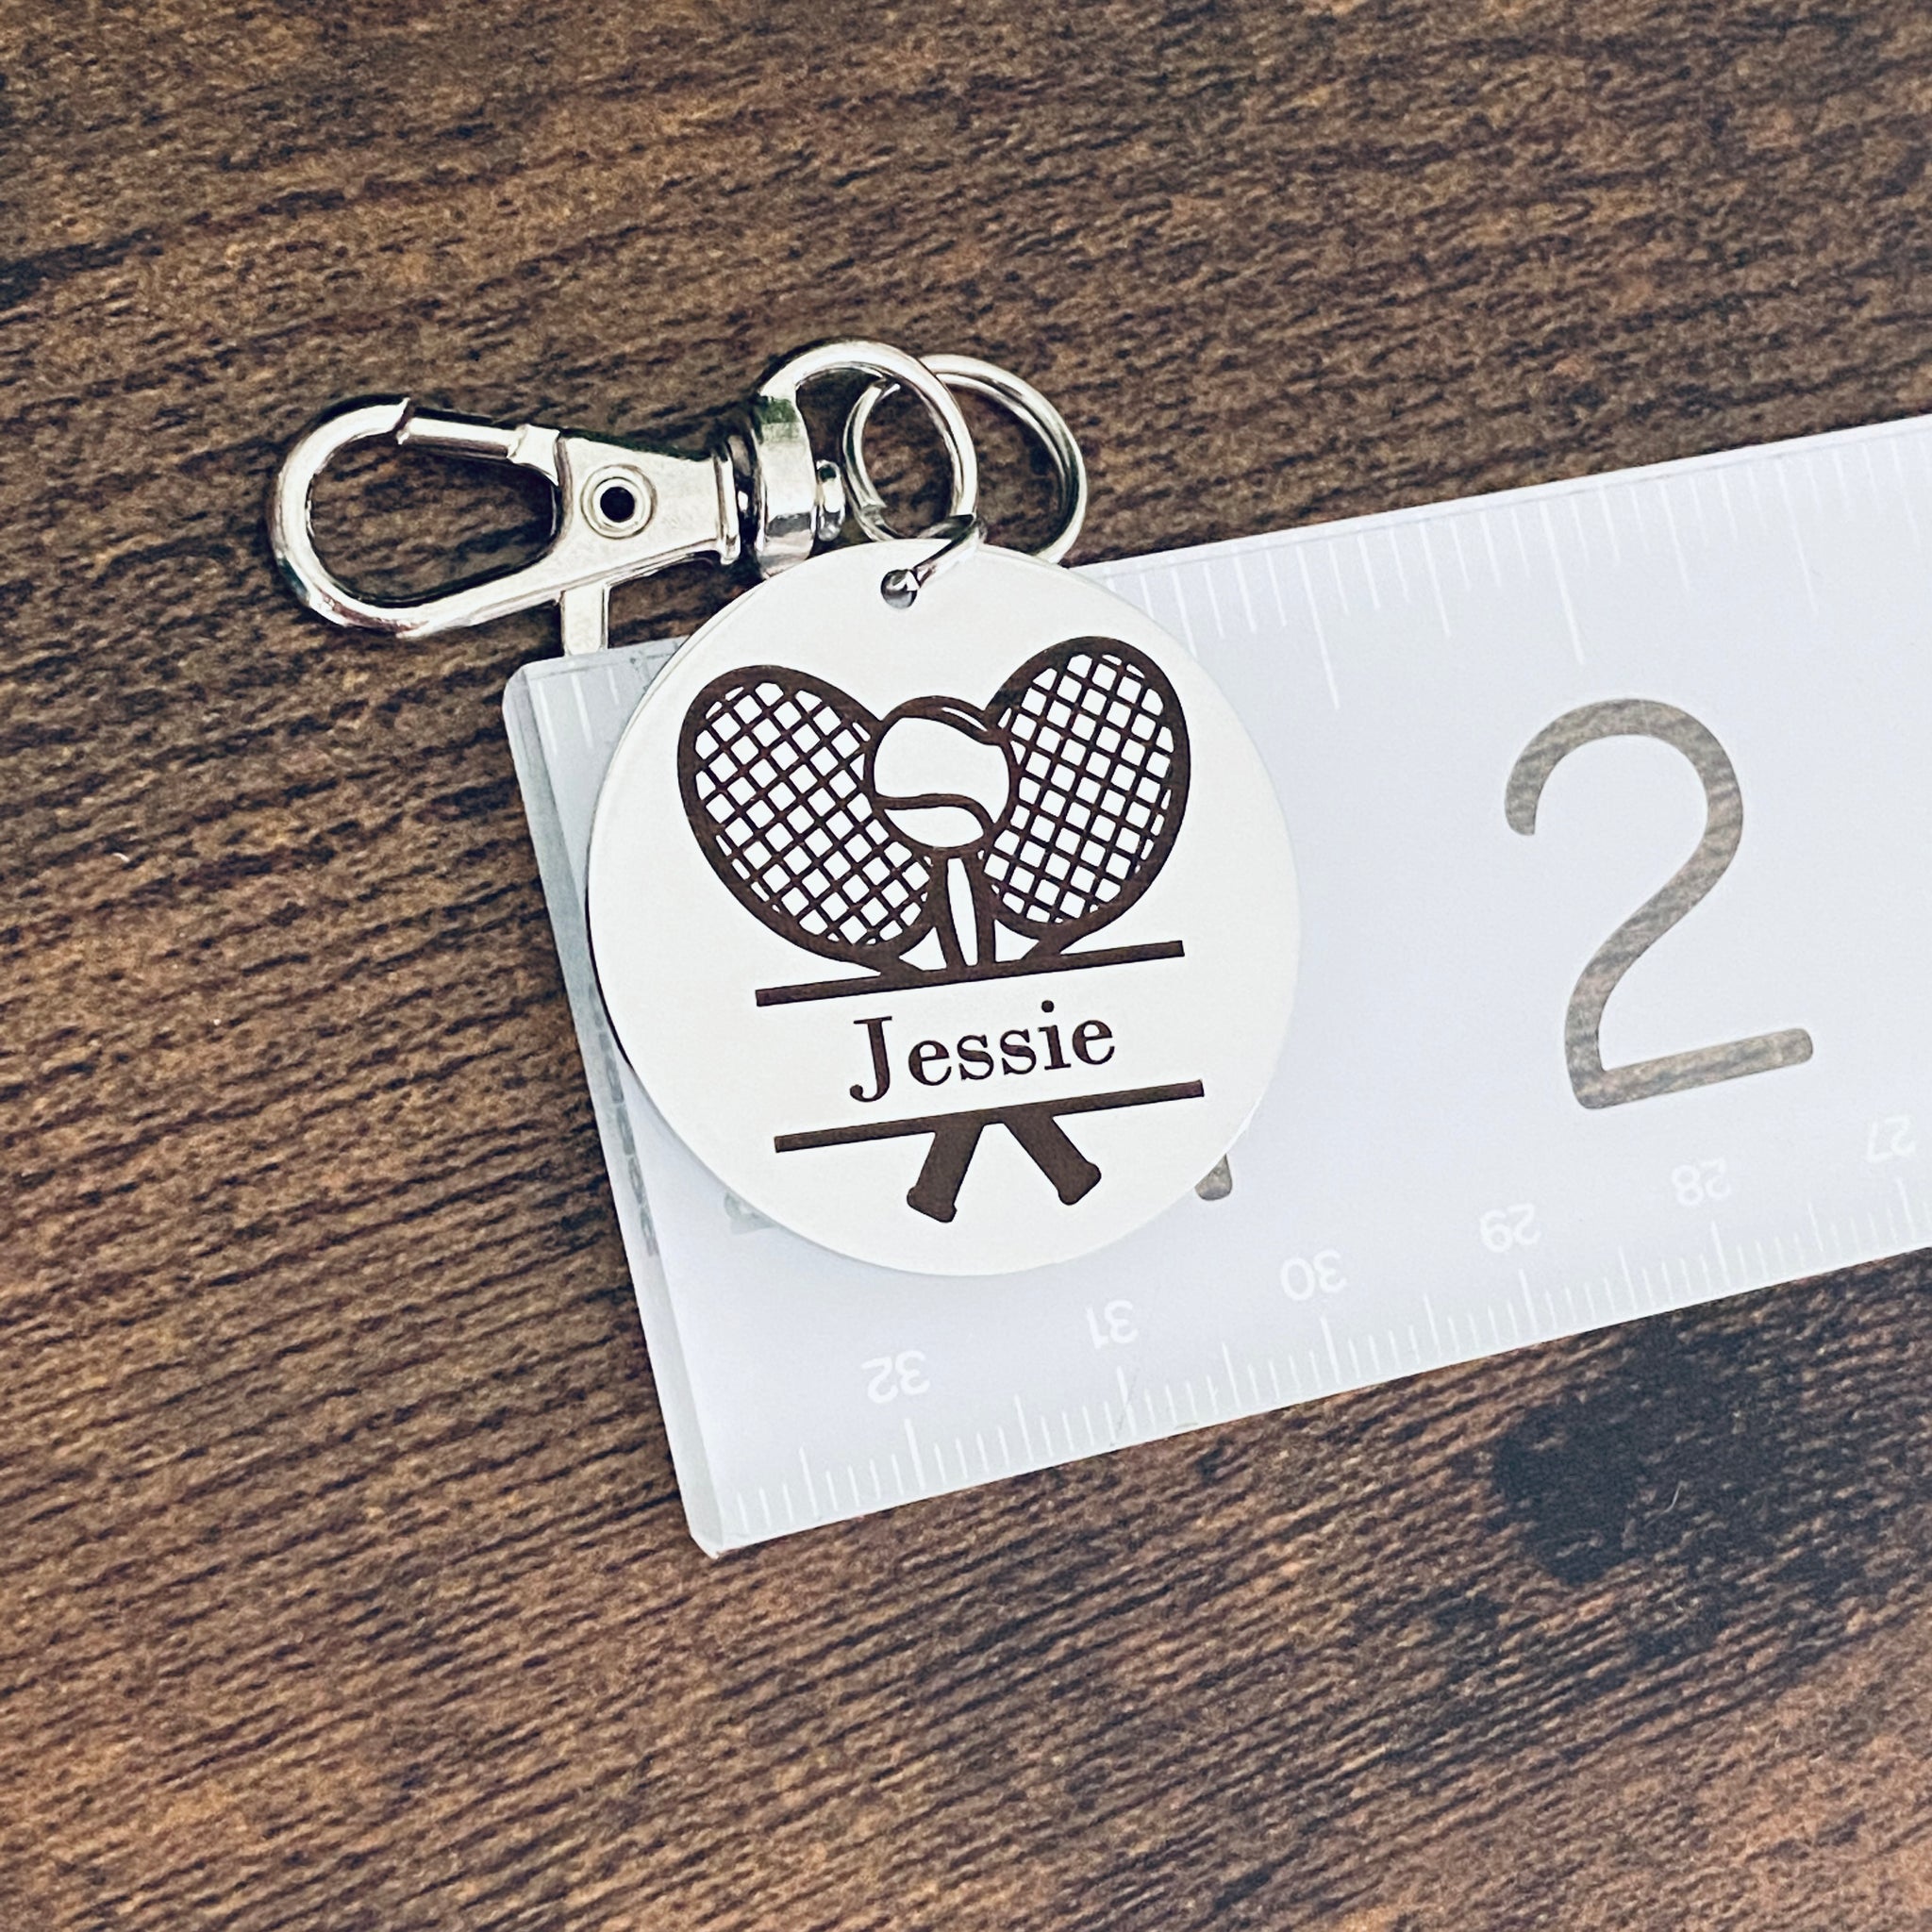 Sports Bag Tags – The KerbyGrace Collection